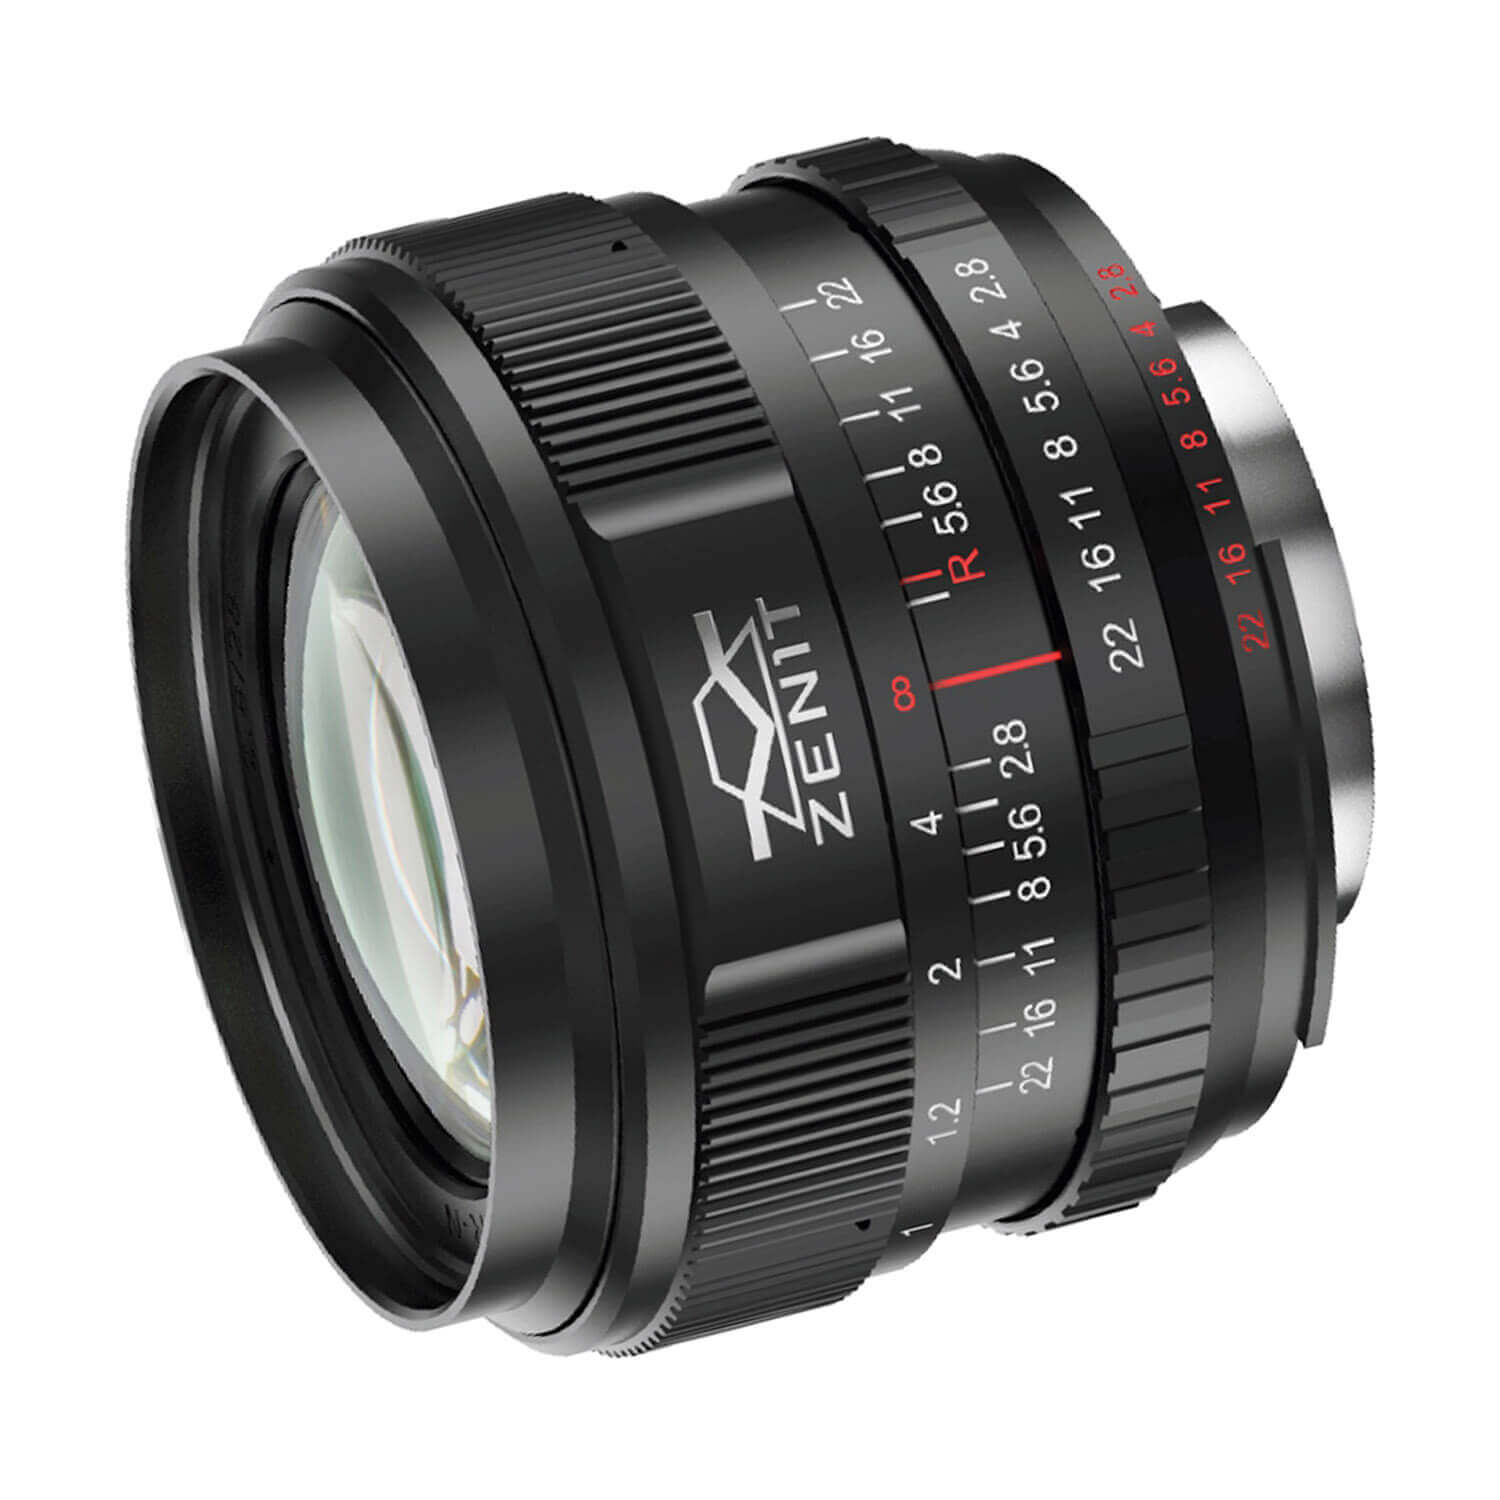 New wide-angle lenses